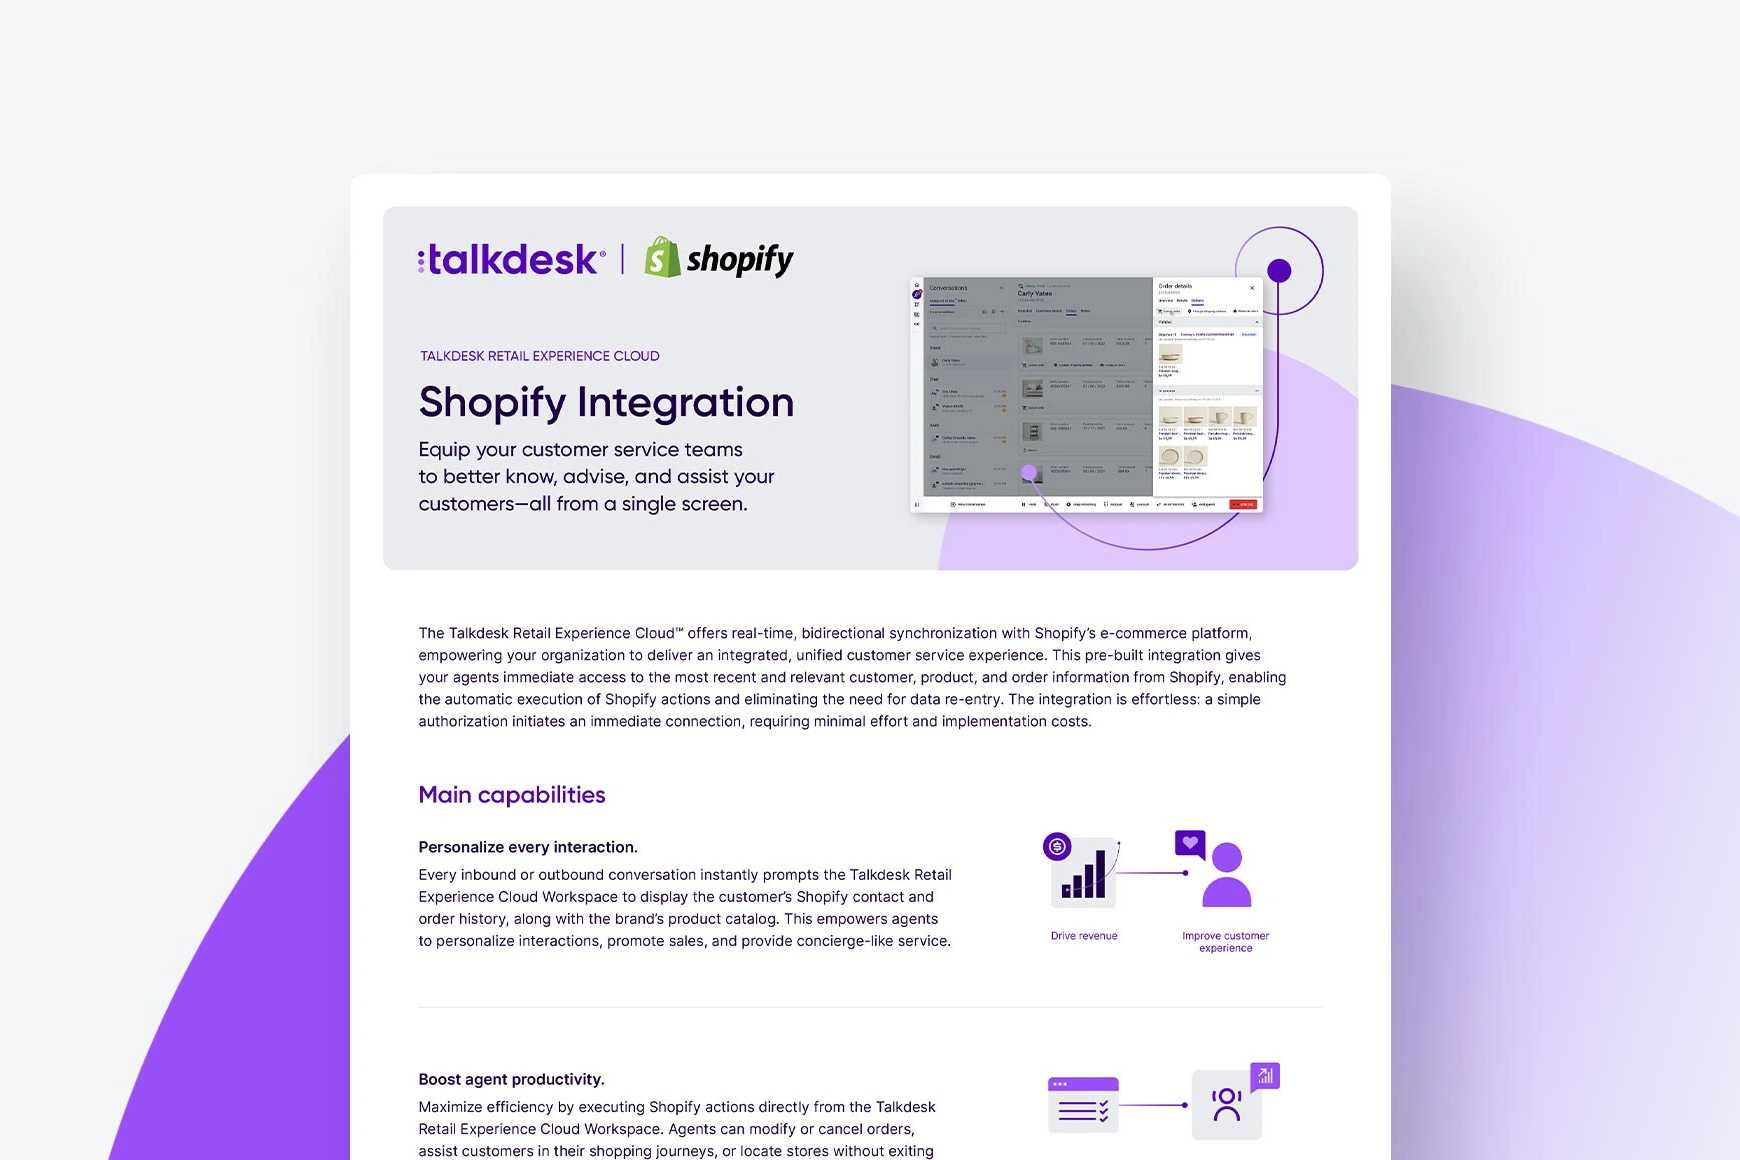 Talkdesk Retail Experience Cloud: Shopify Integration